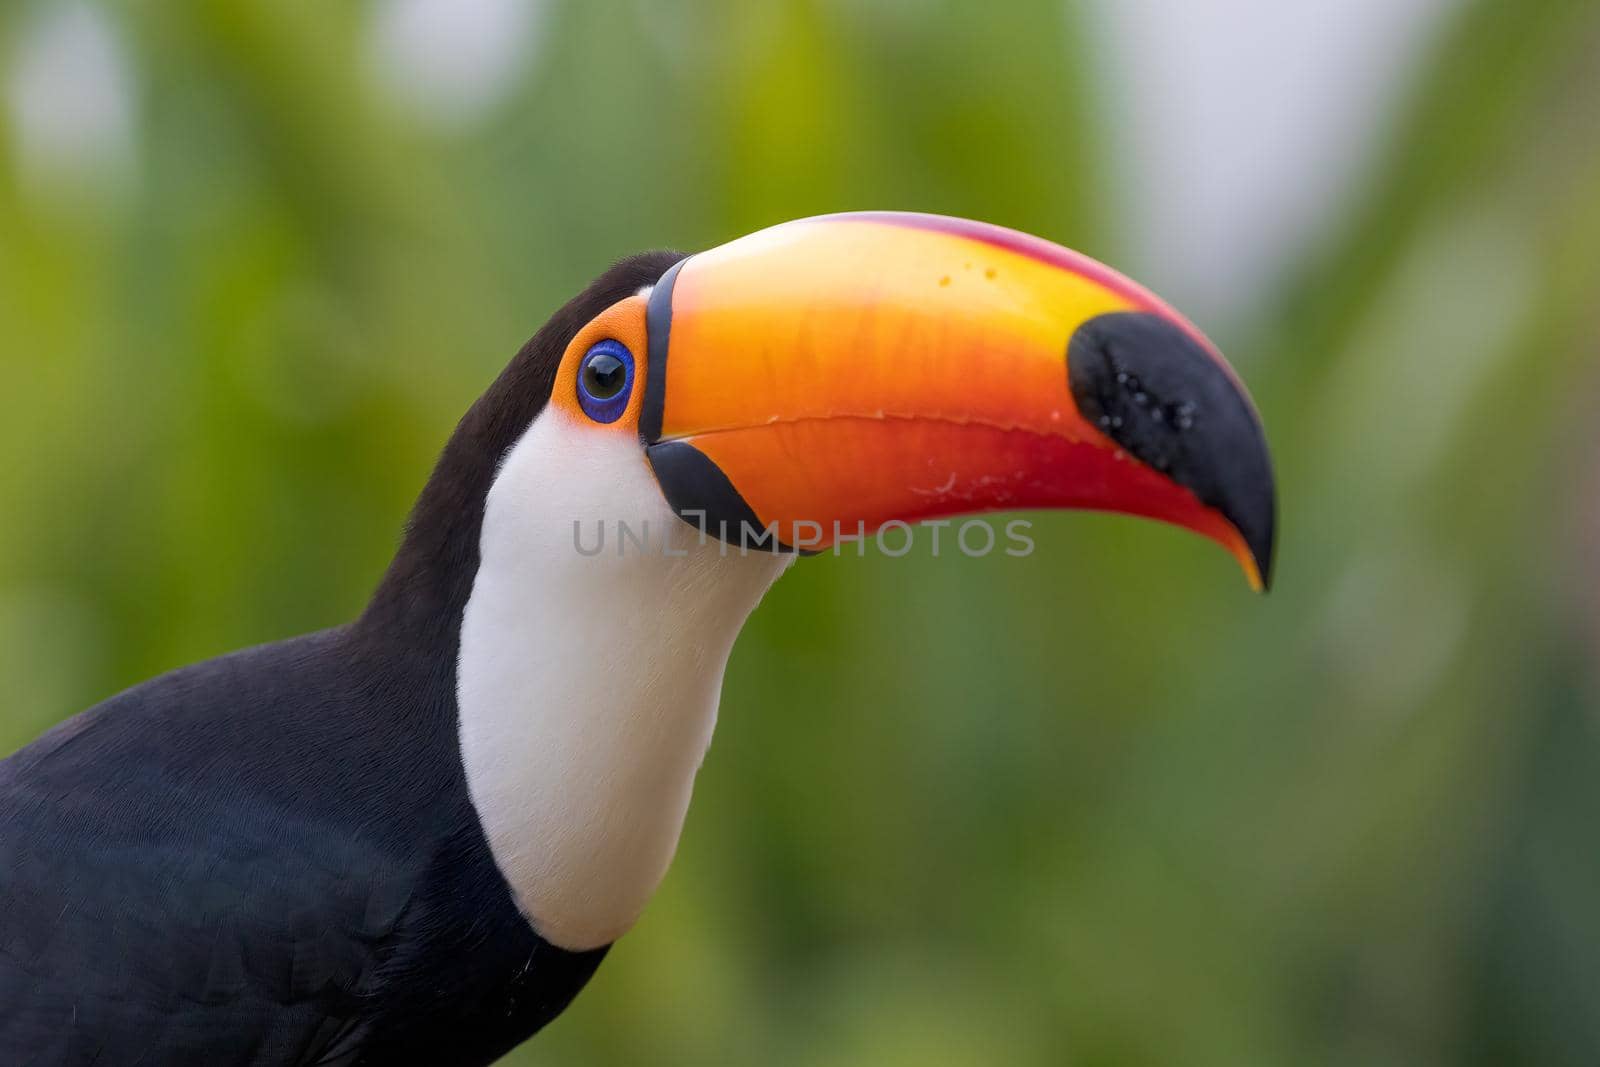 The Toco toucan, Ramphastos toco, is the largest of over 40 different species of toucan.